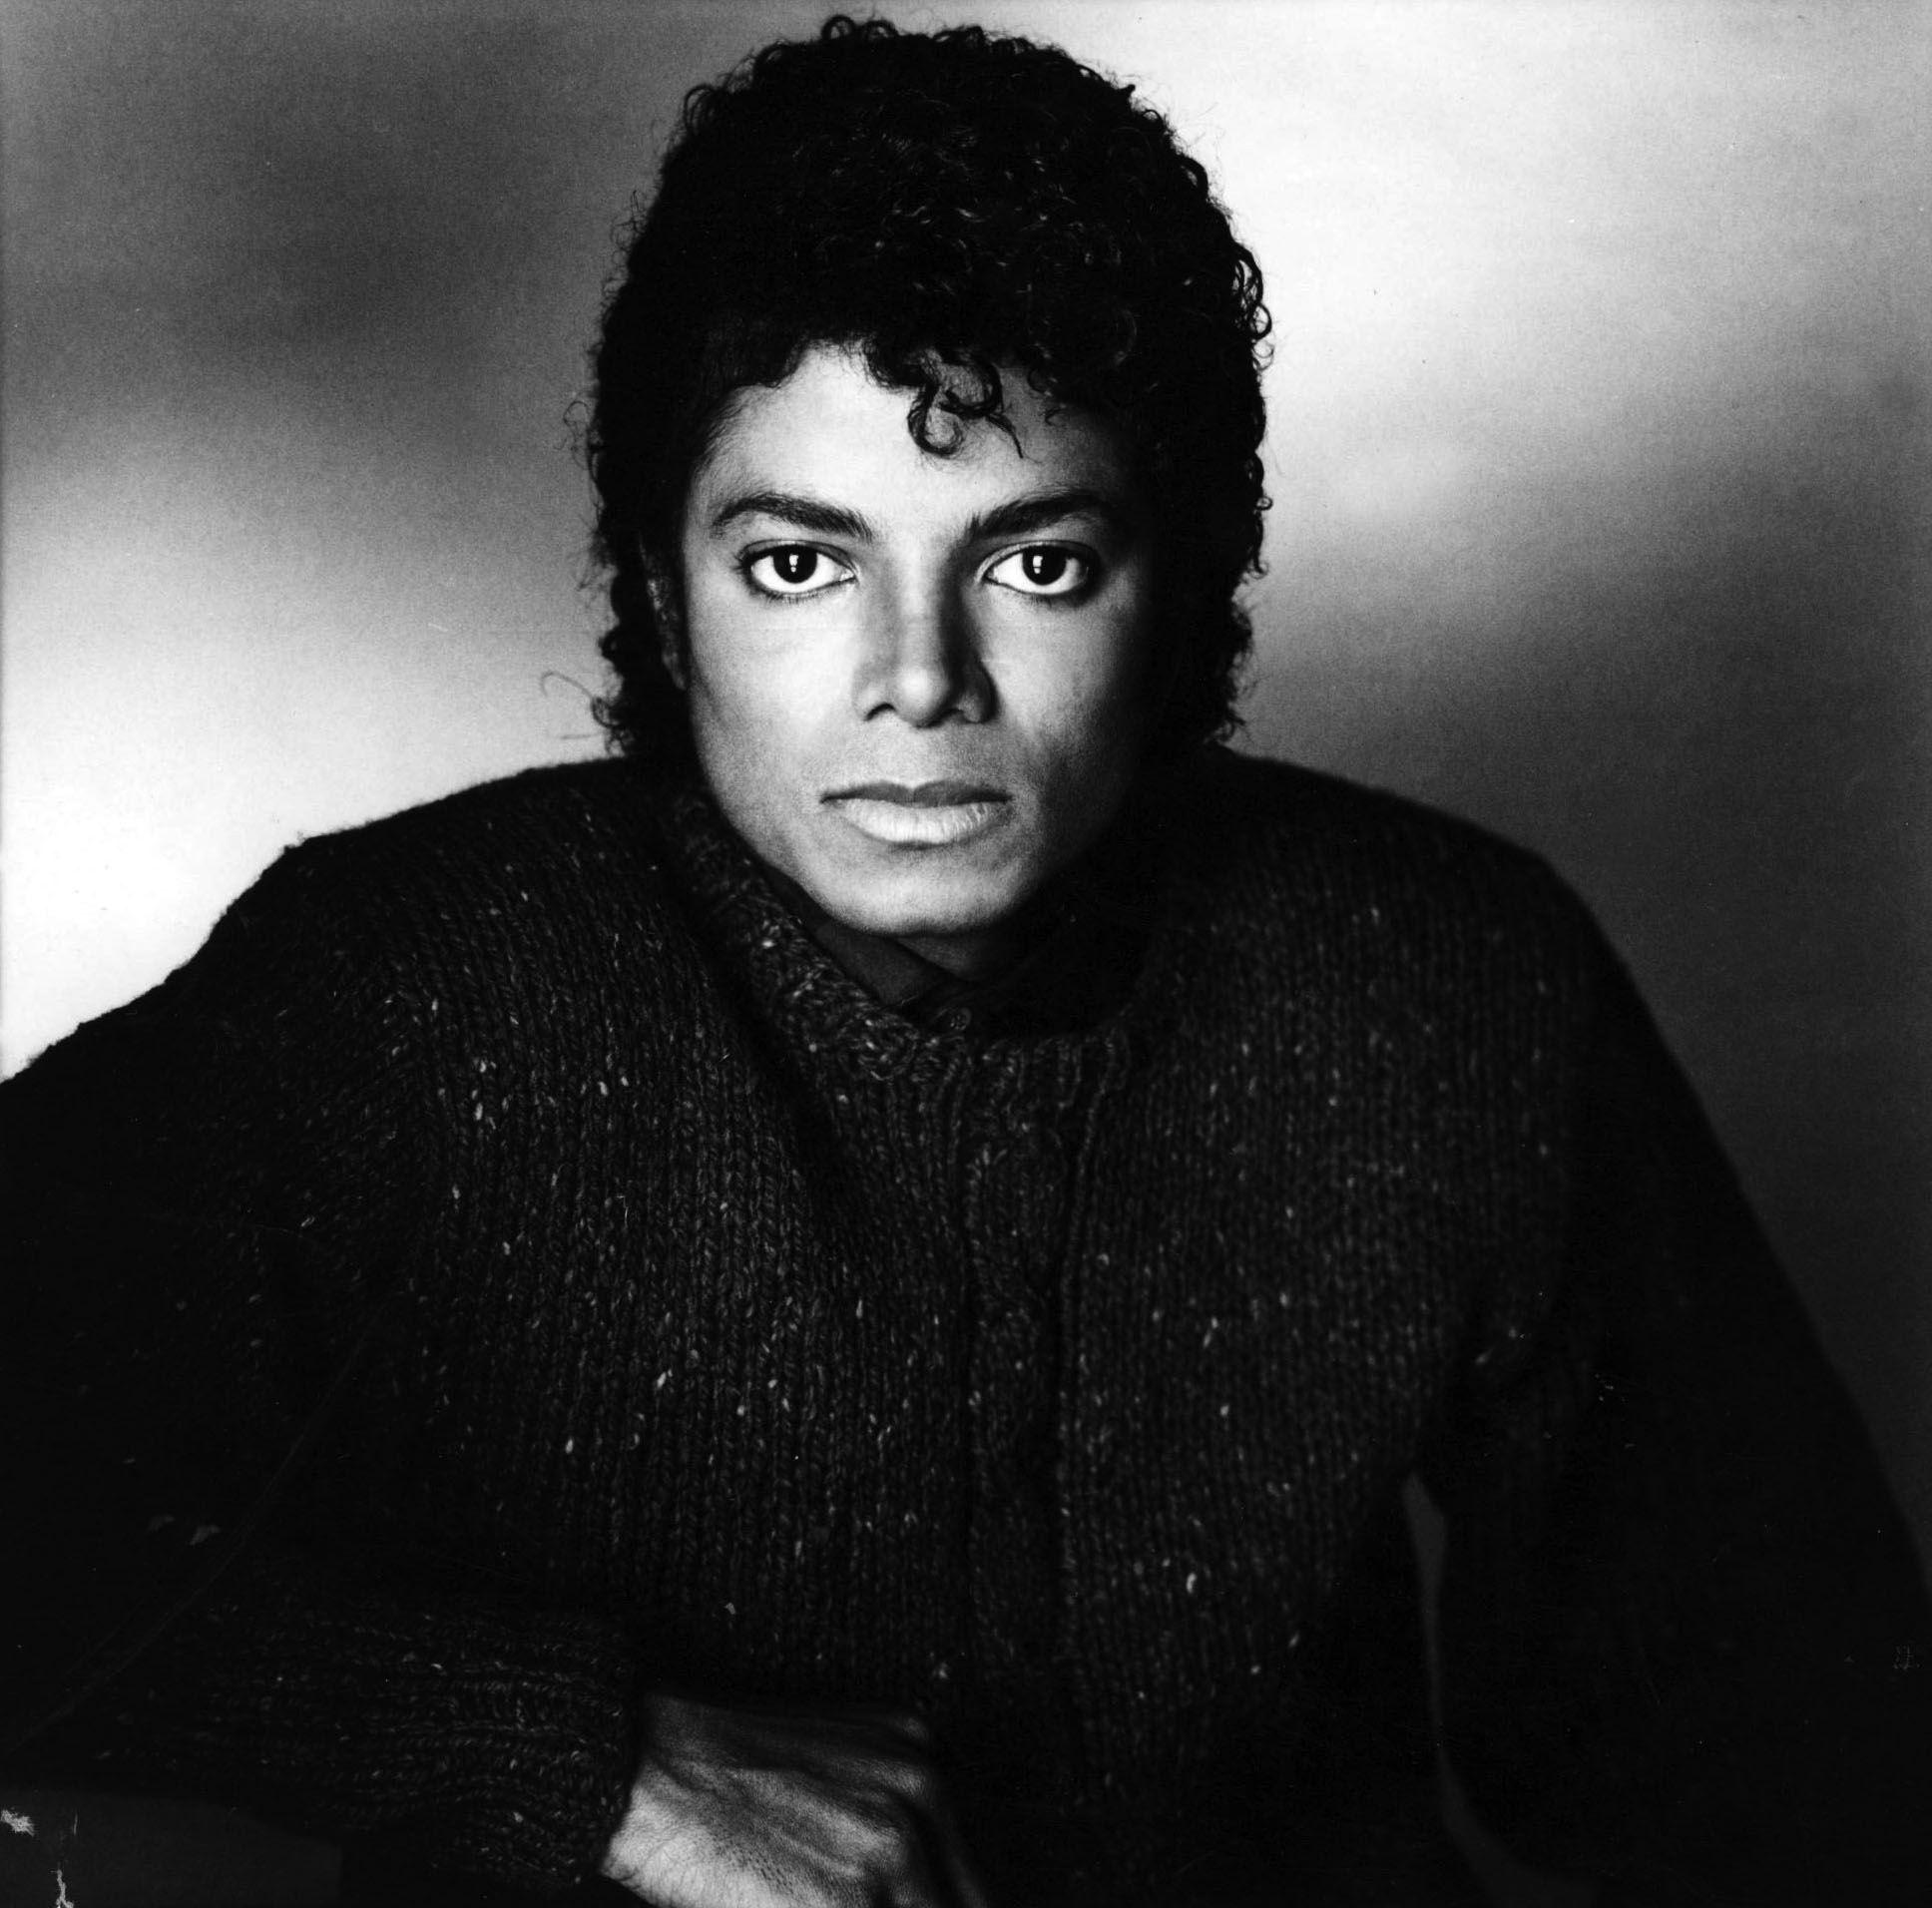 image of michael jackson.. anniversary of the loss. The King